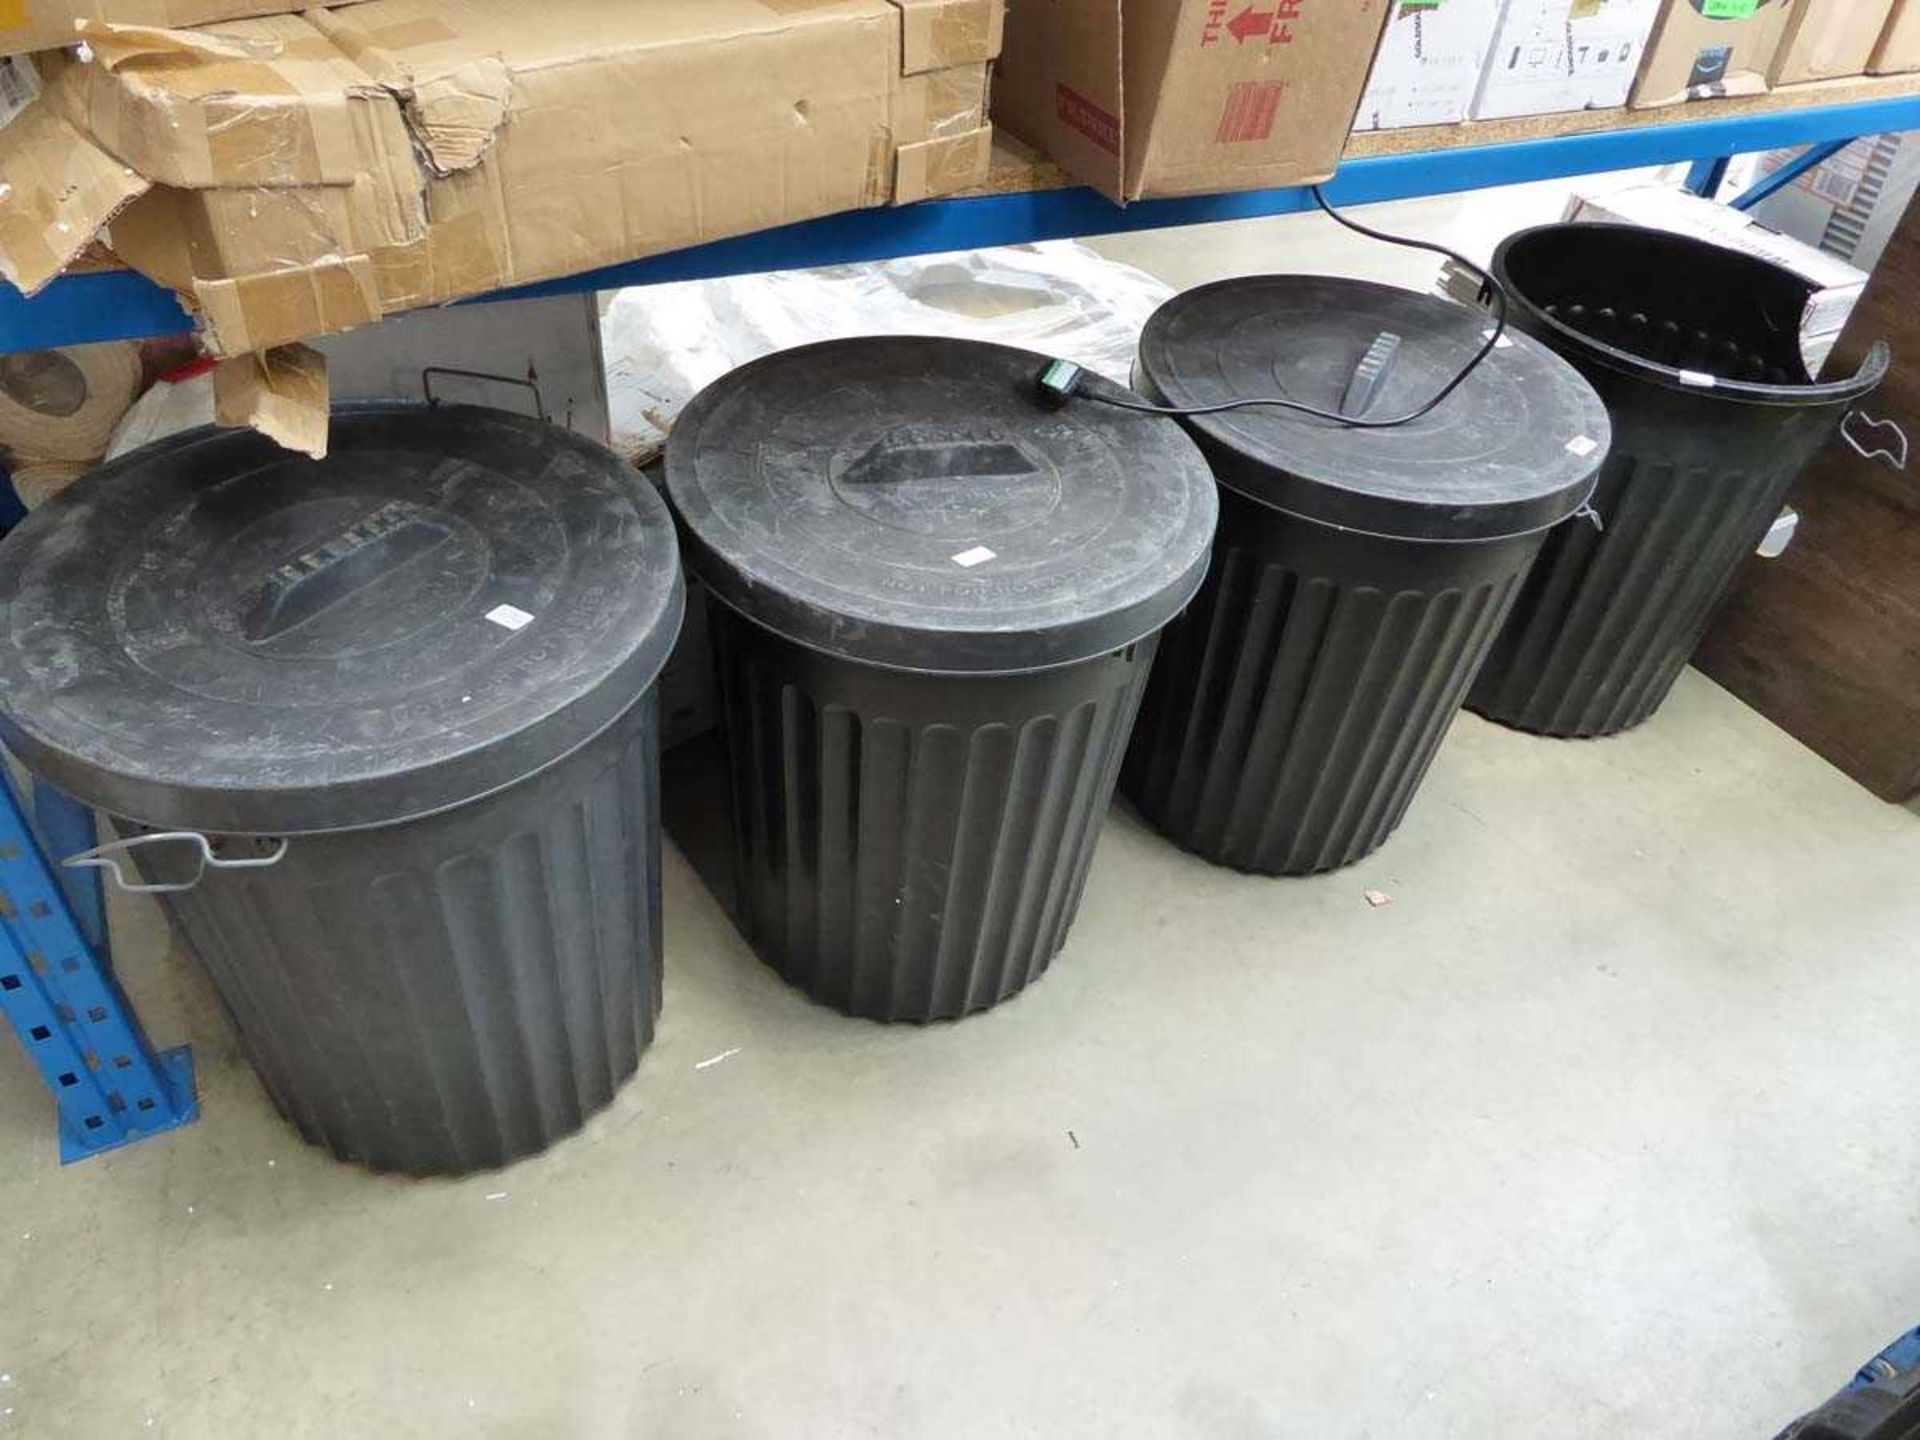 4 large rubbish bins containing white cable clips